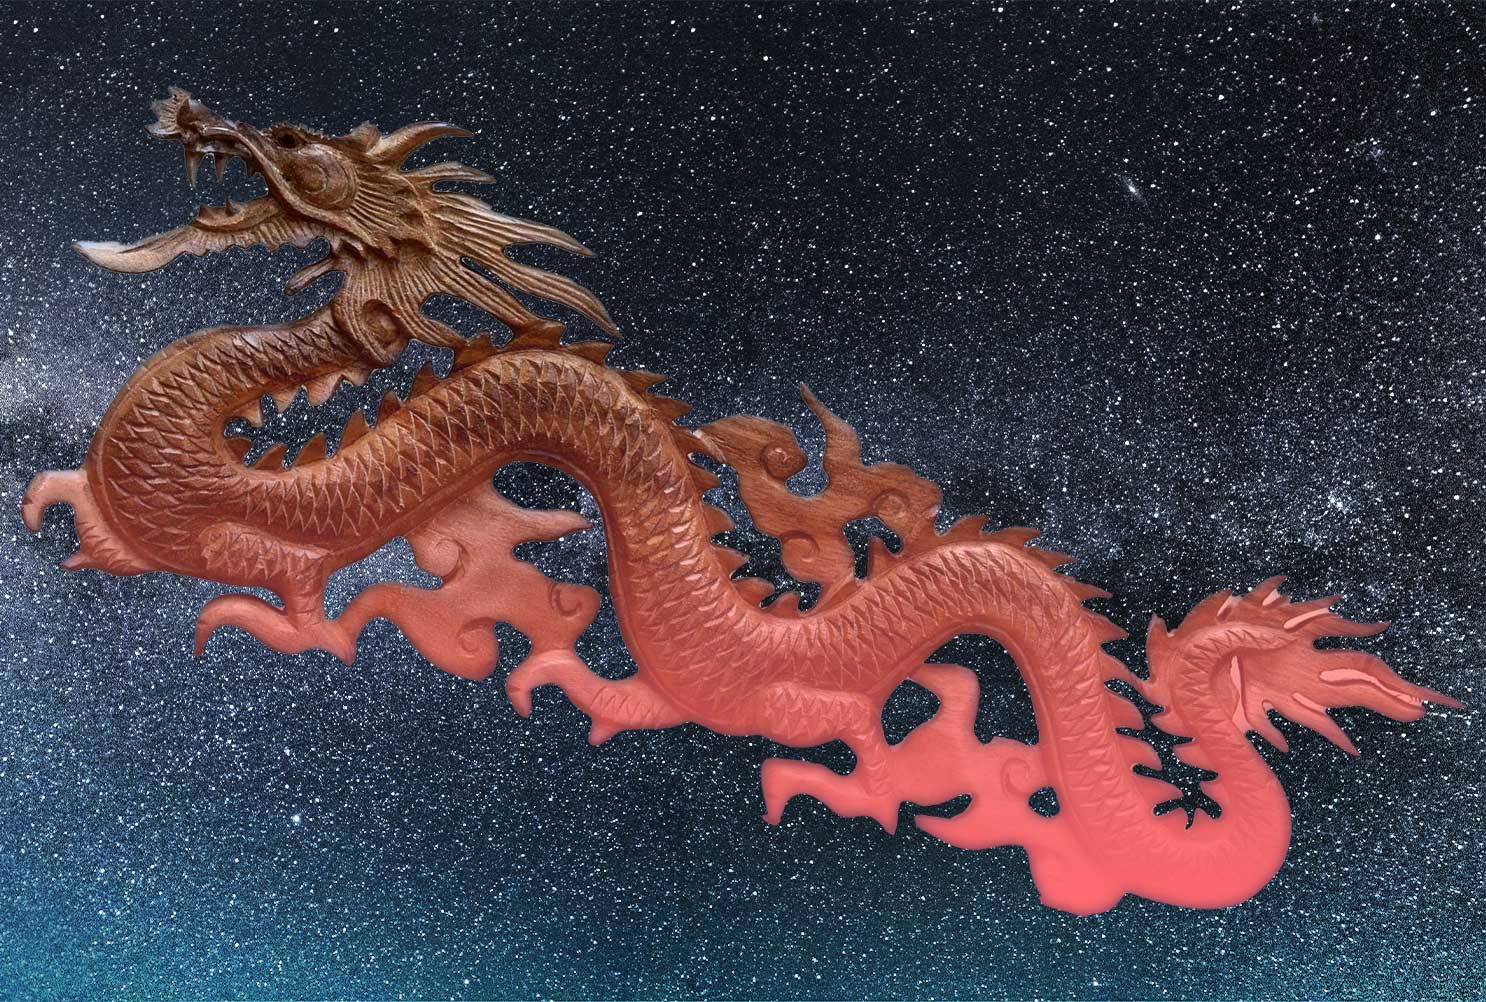 Astrology of the Year of the Wood Dragon